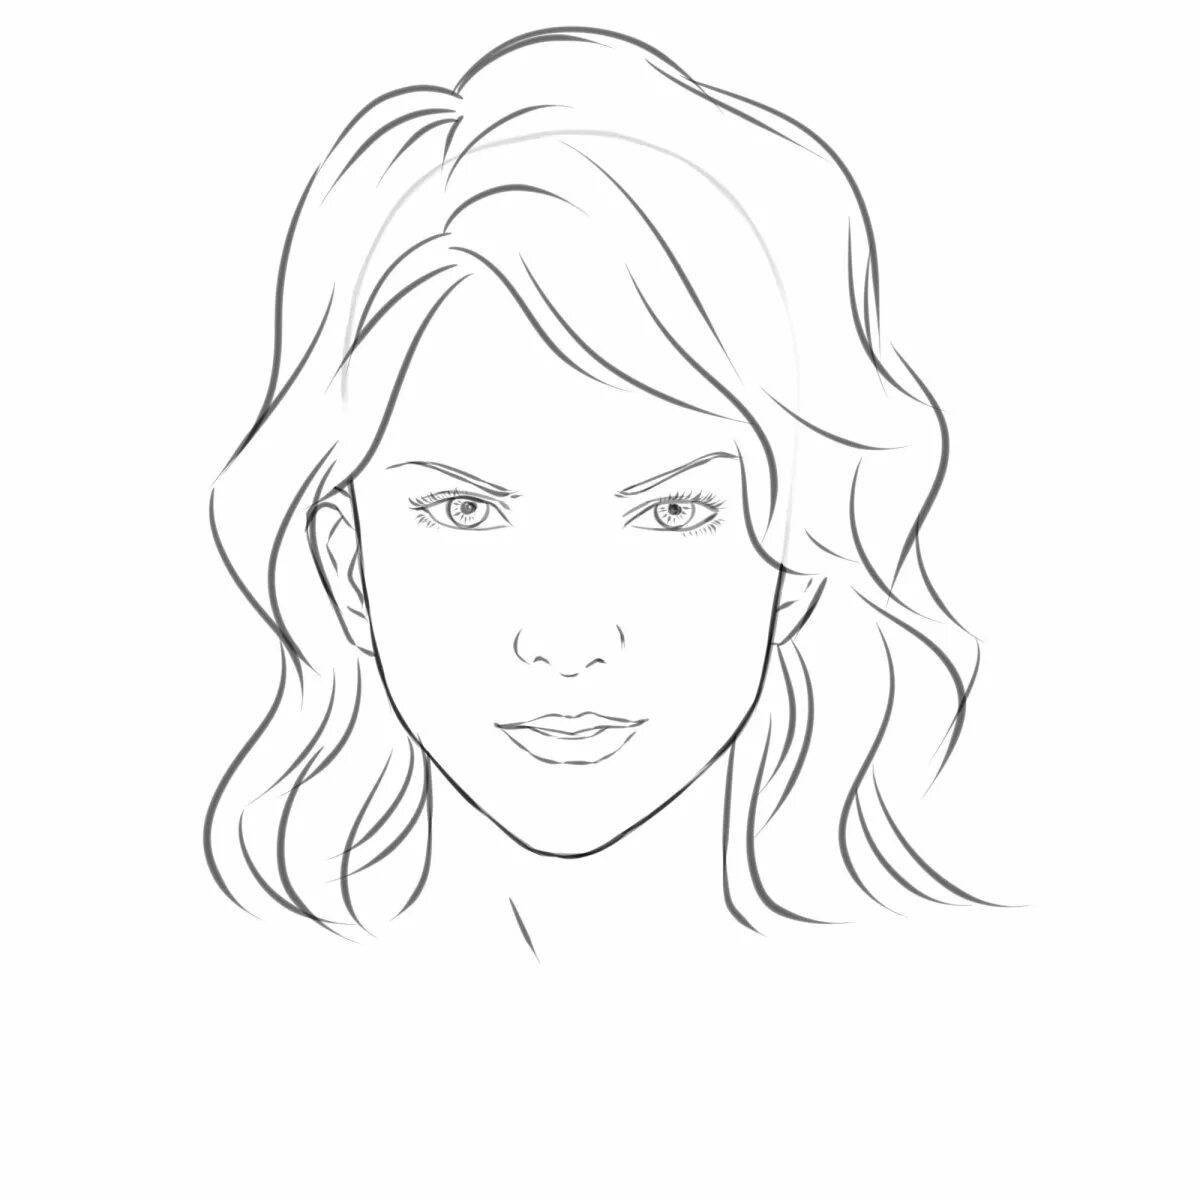 Magic face coloring page